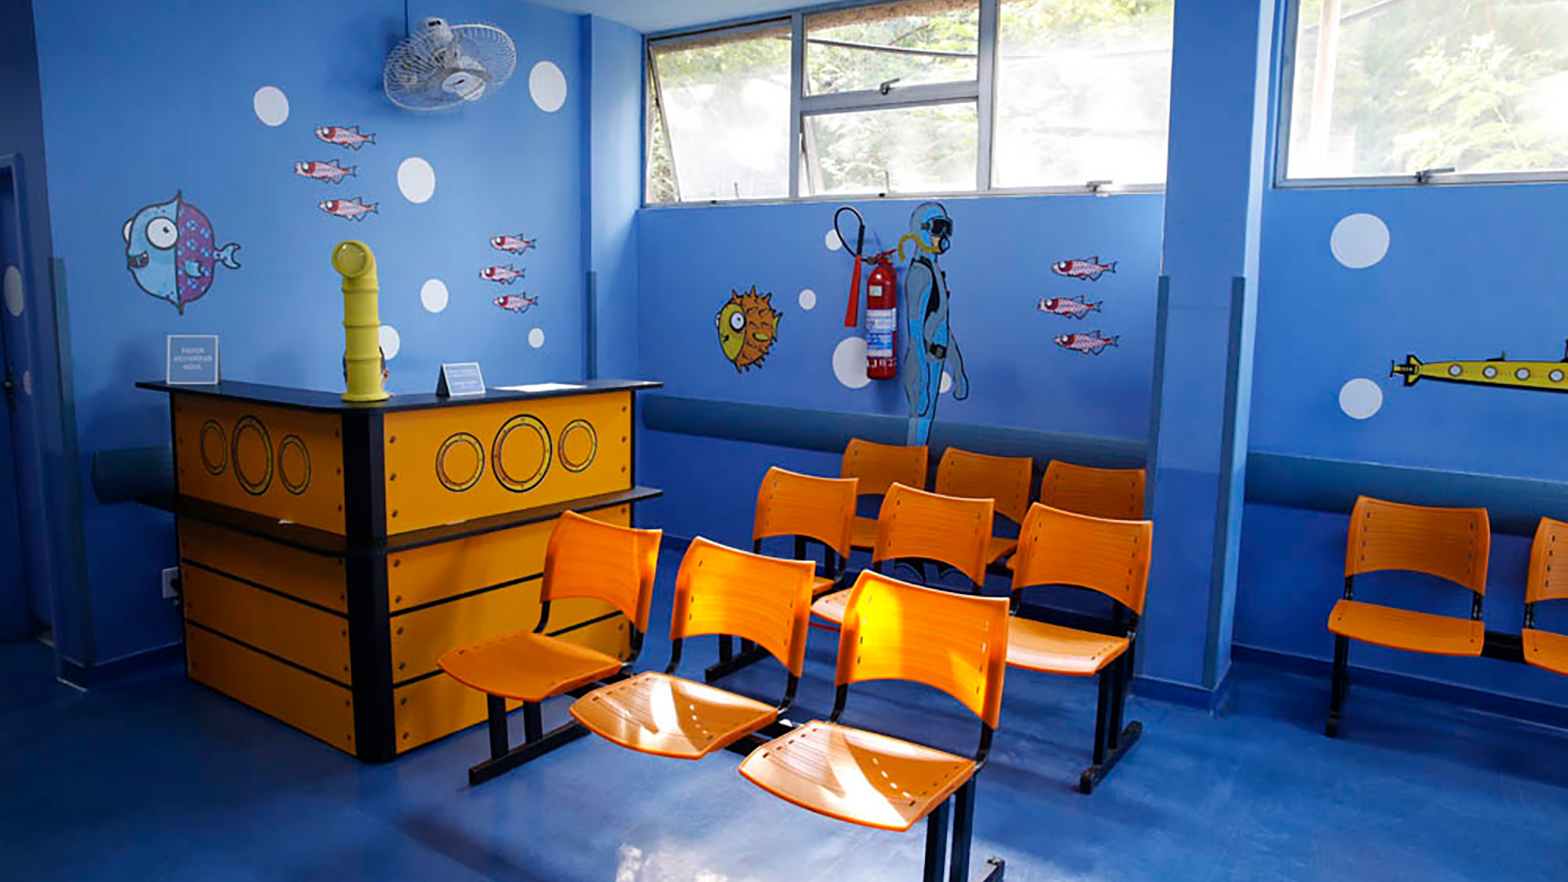 An underwater themed room at the Jesus Municipal Hospital in Rio de Janeiro provides a warm welcome for patients and their family members.